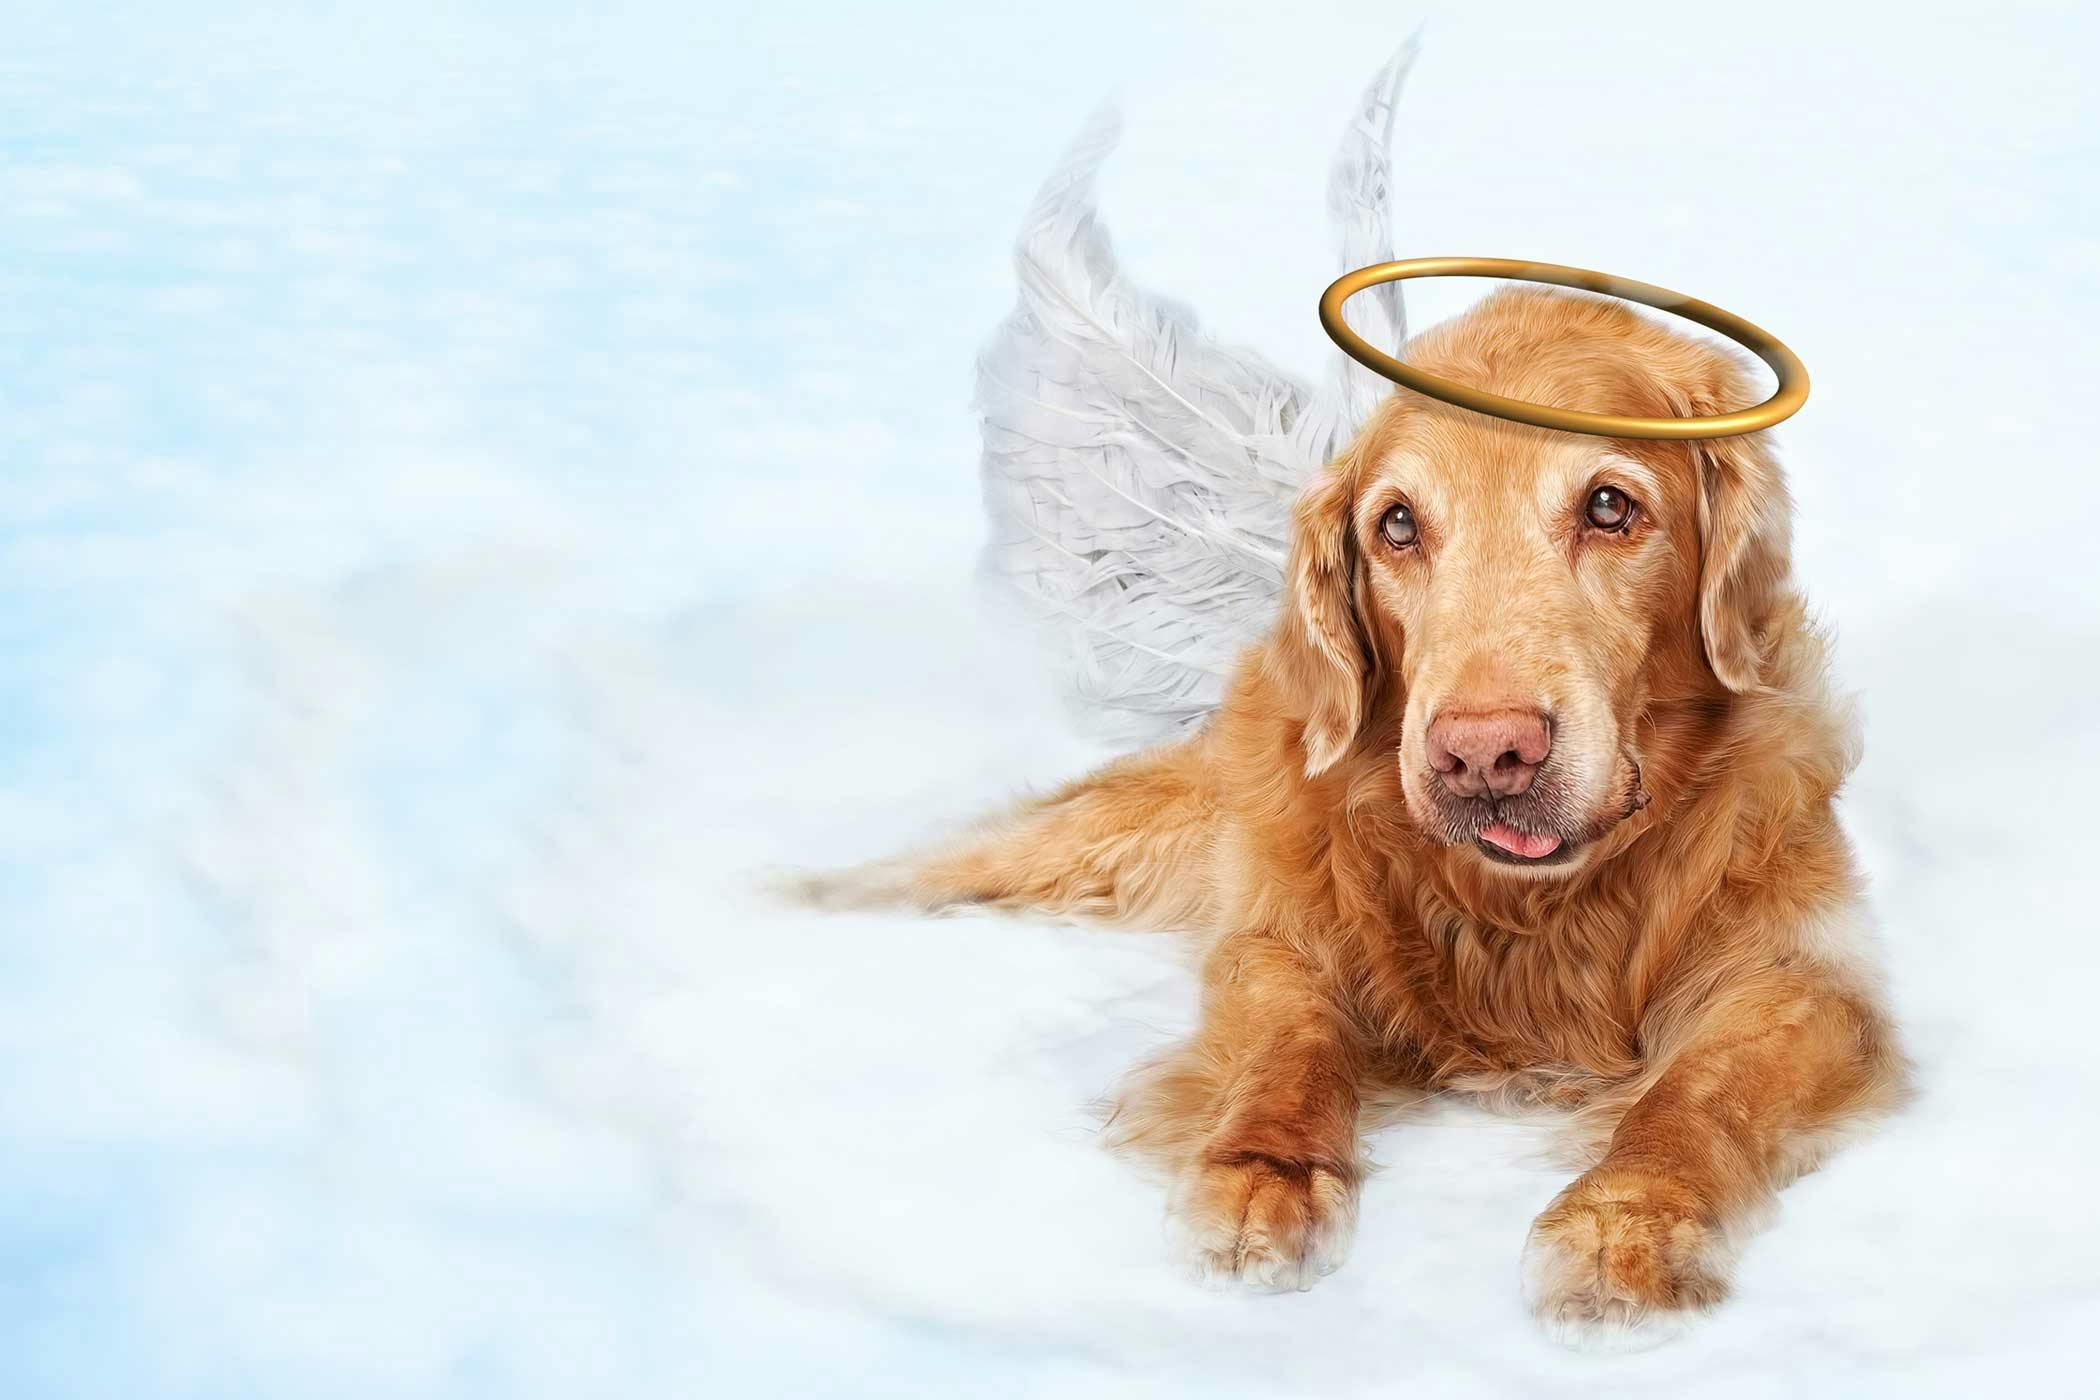 All Dogs Go To Heaven Inspired Dog Names - Wag!